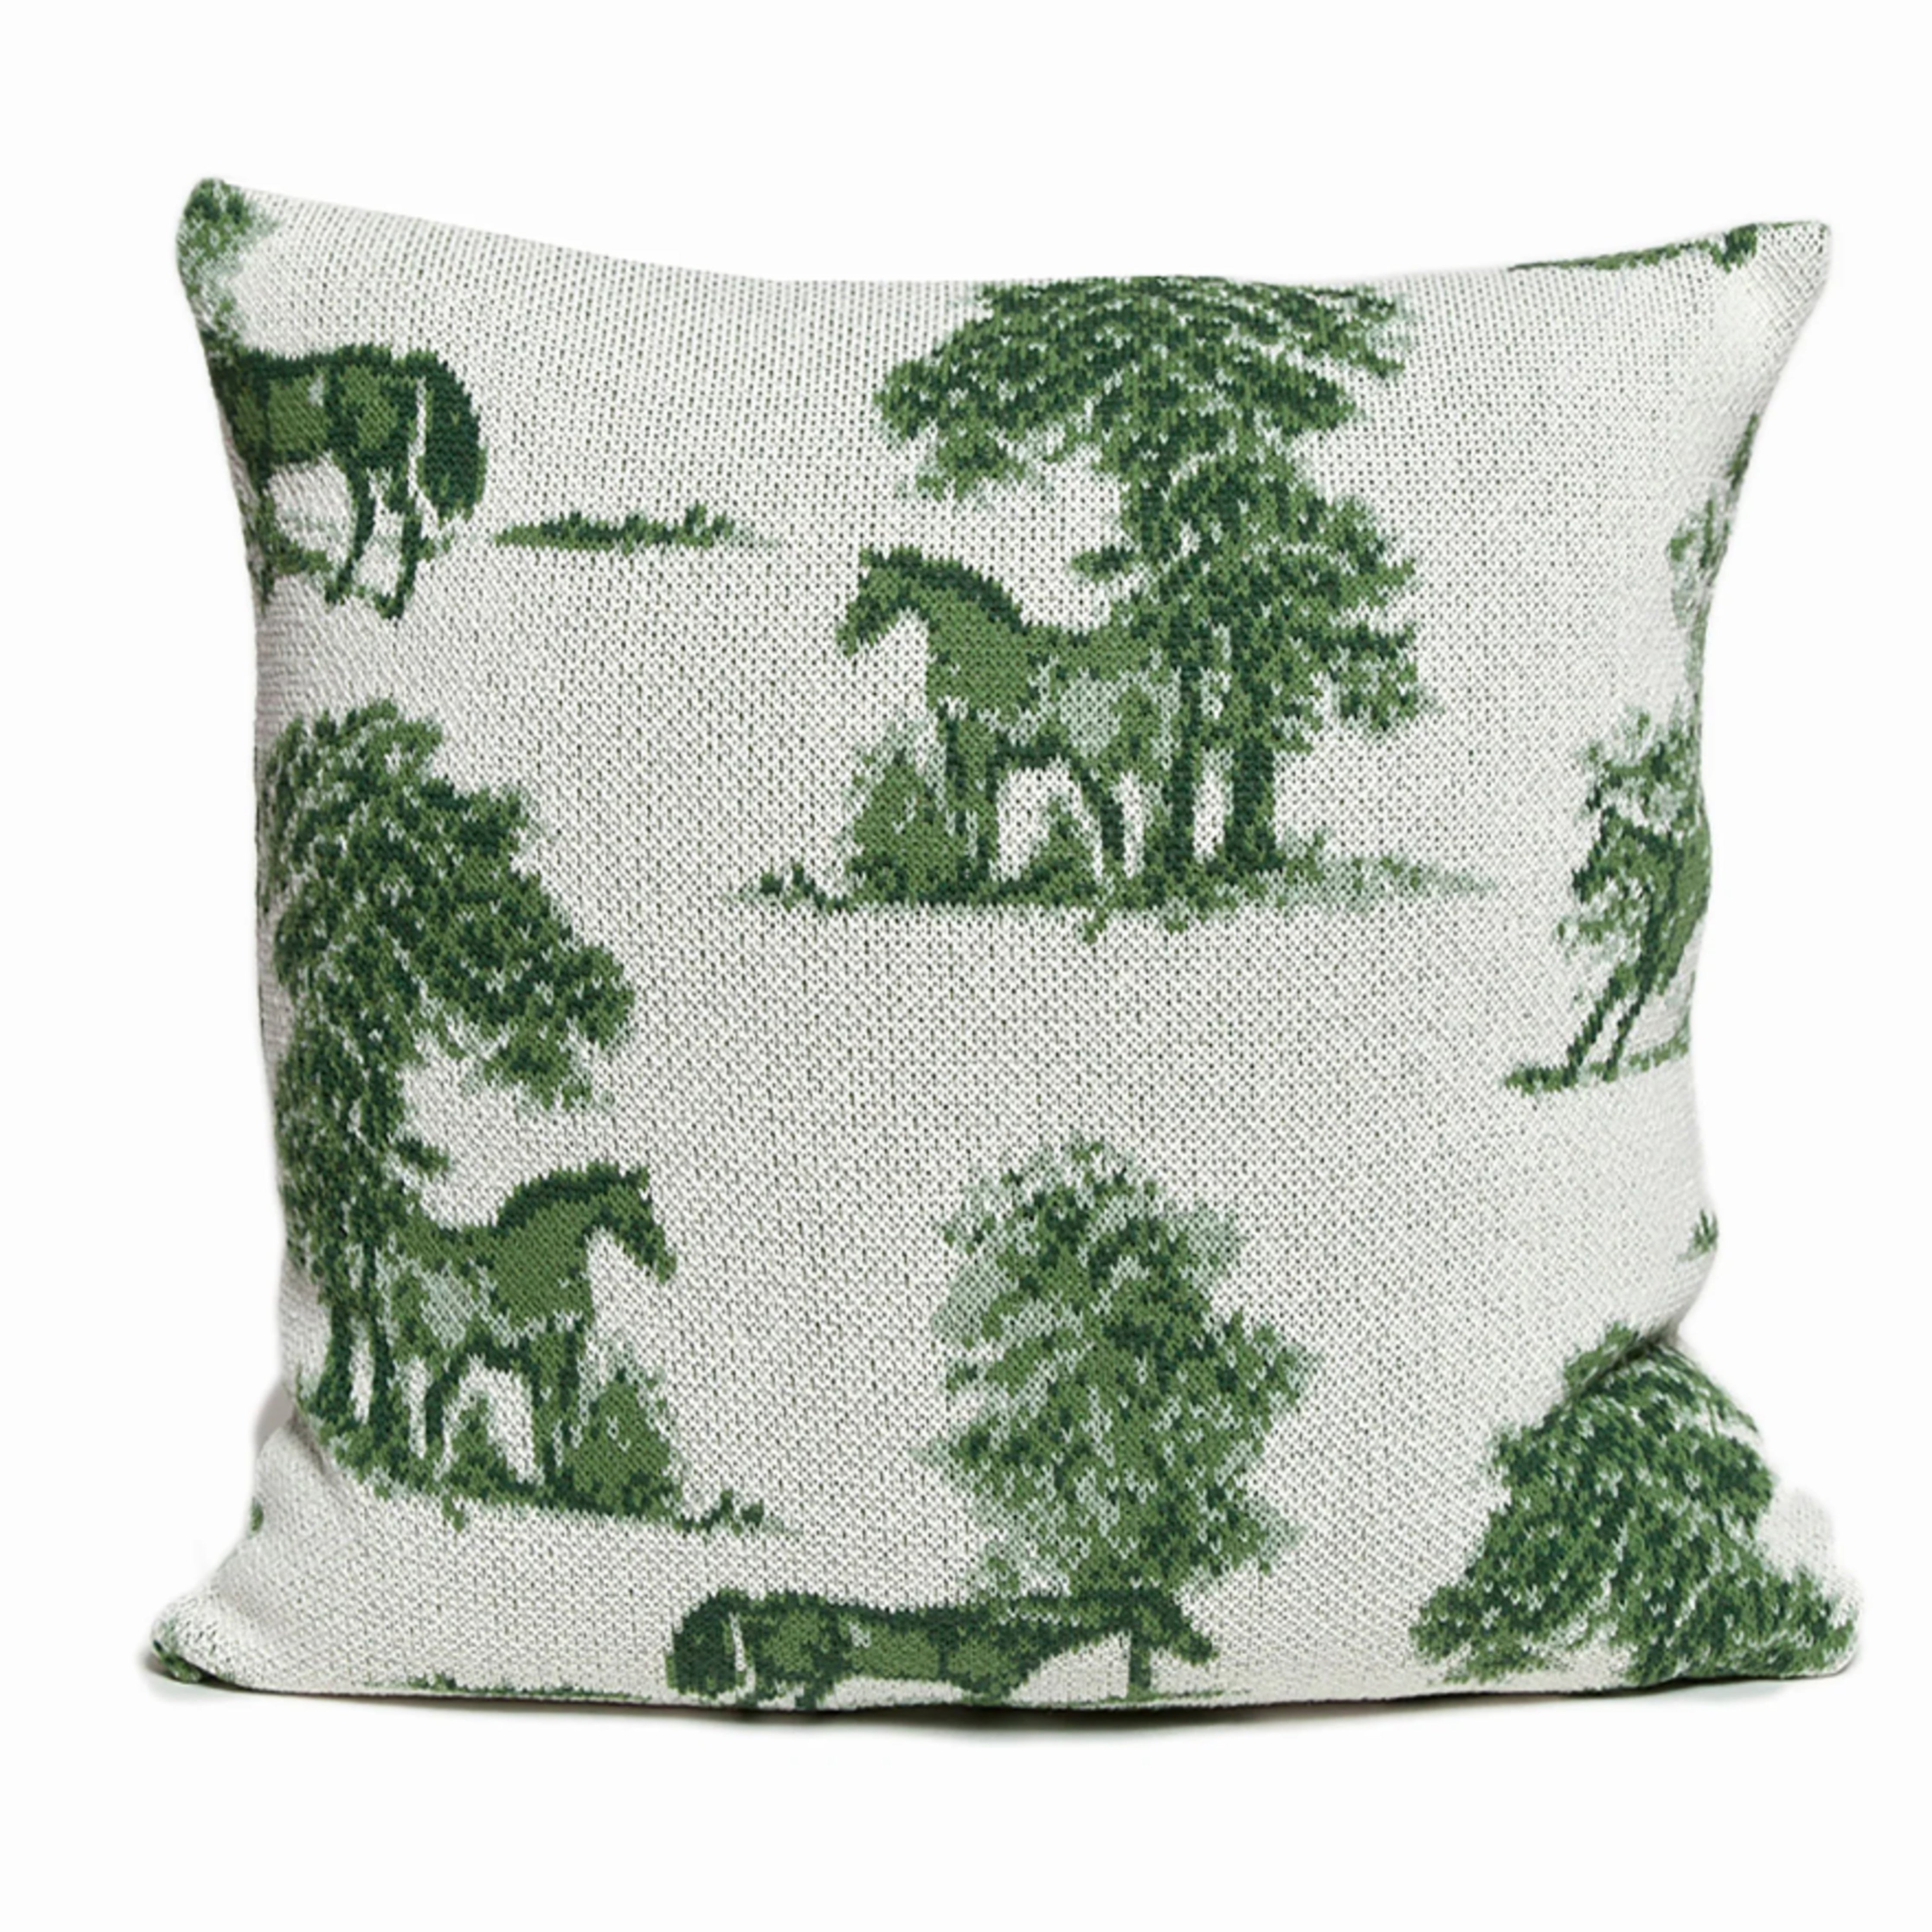 in2Green EQ Pillow